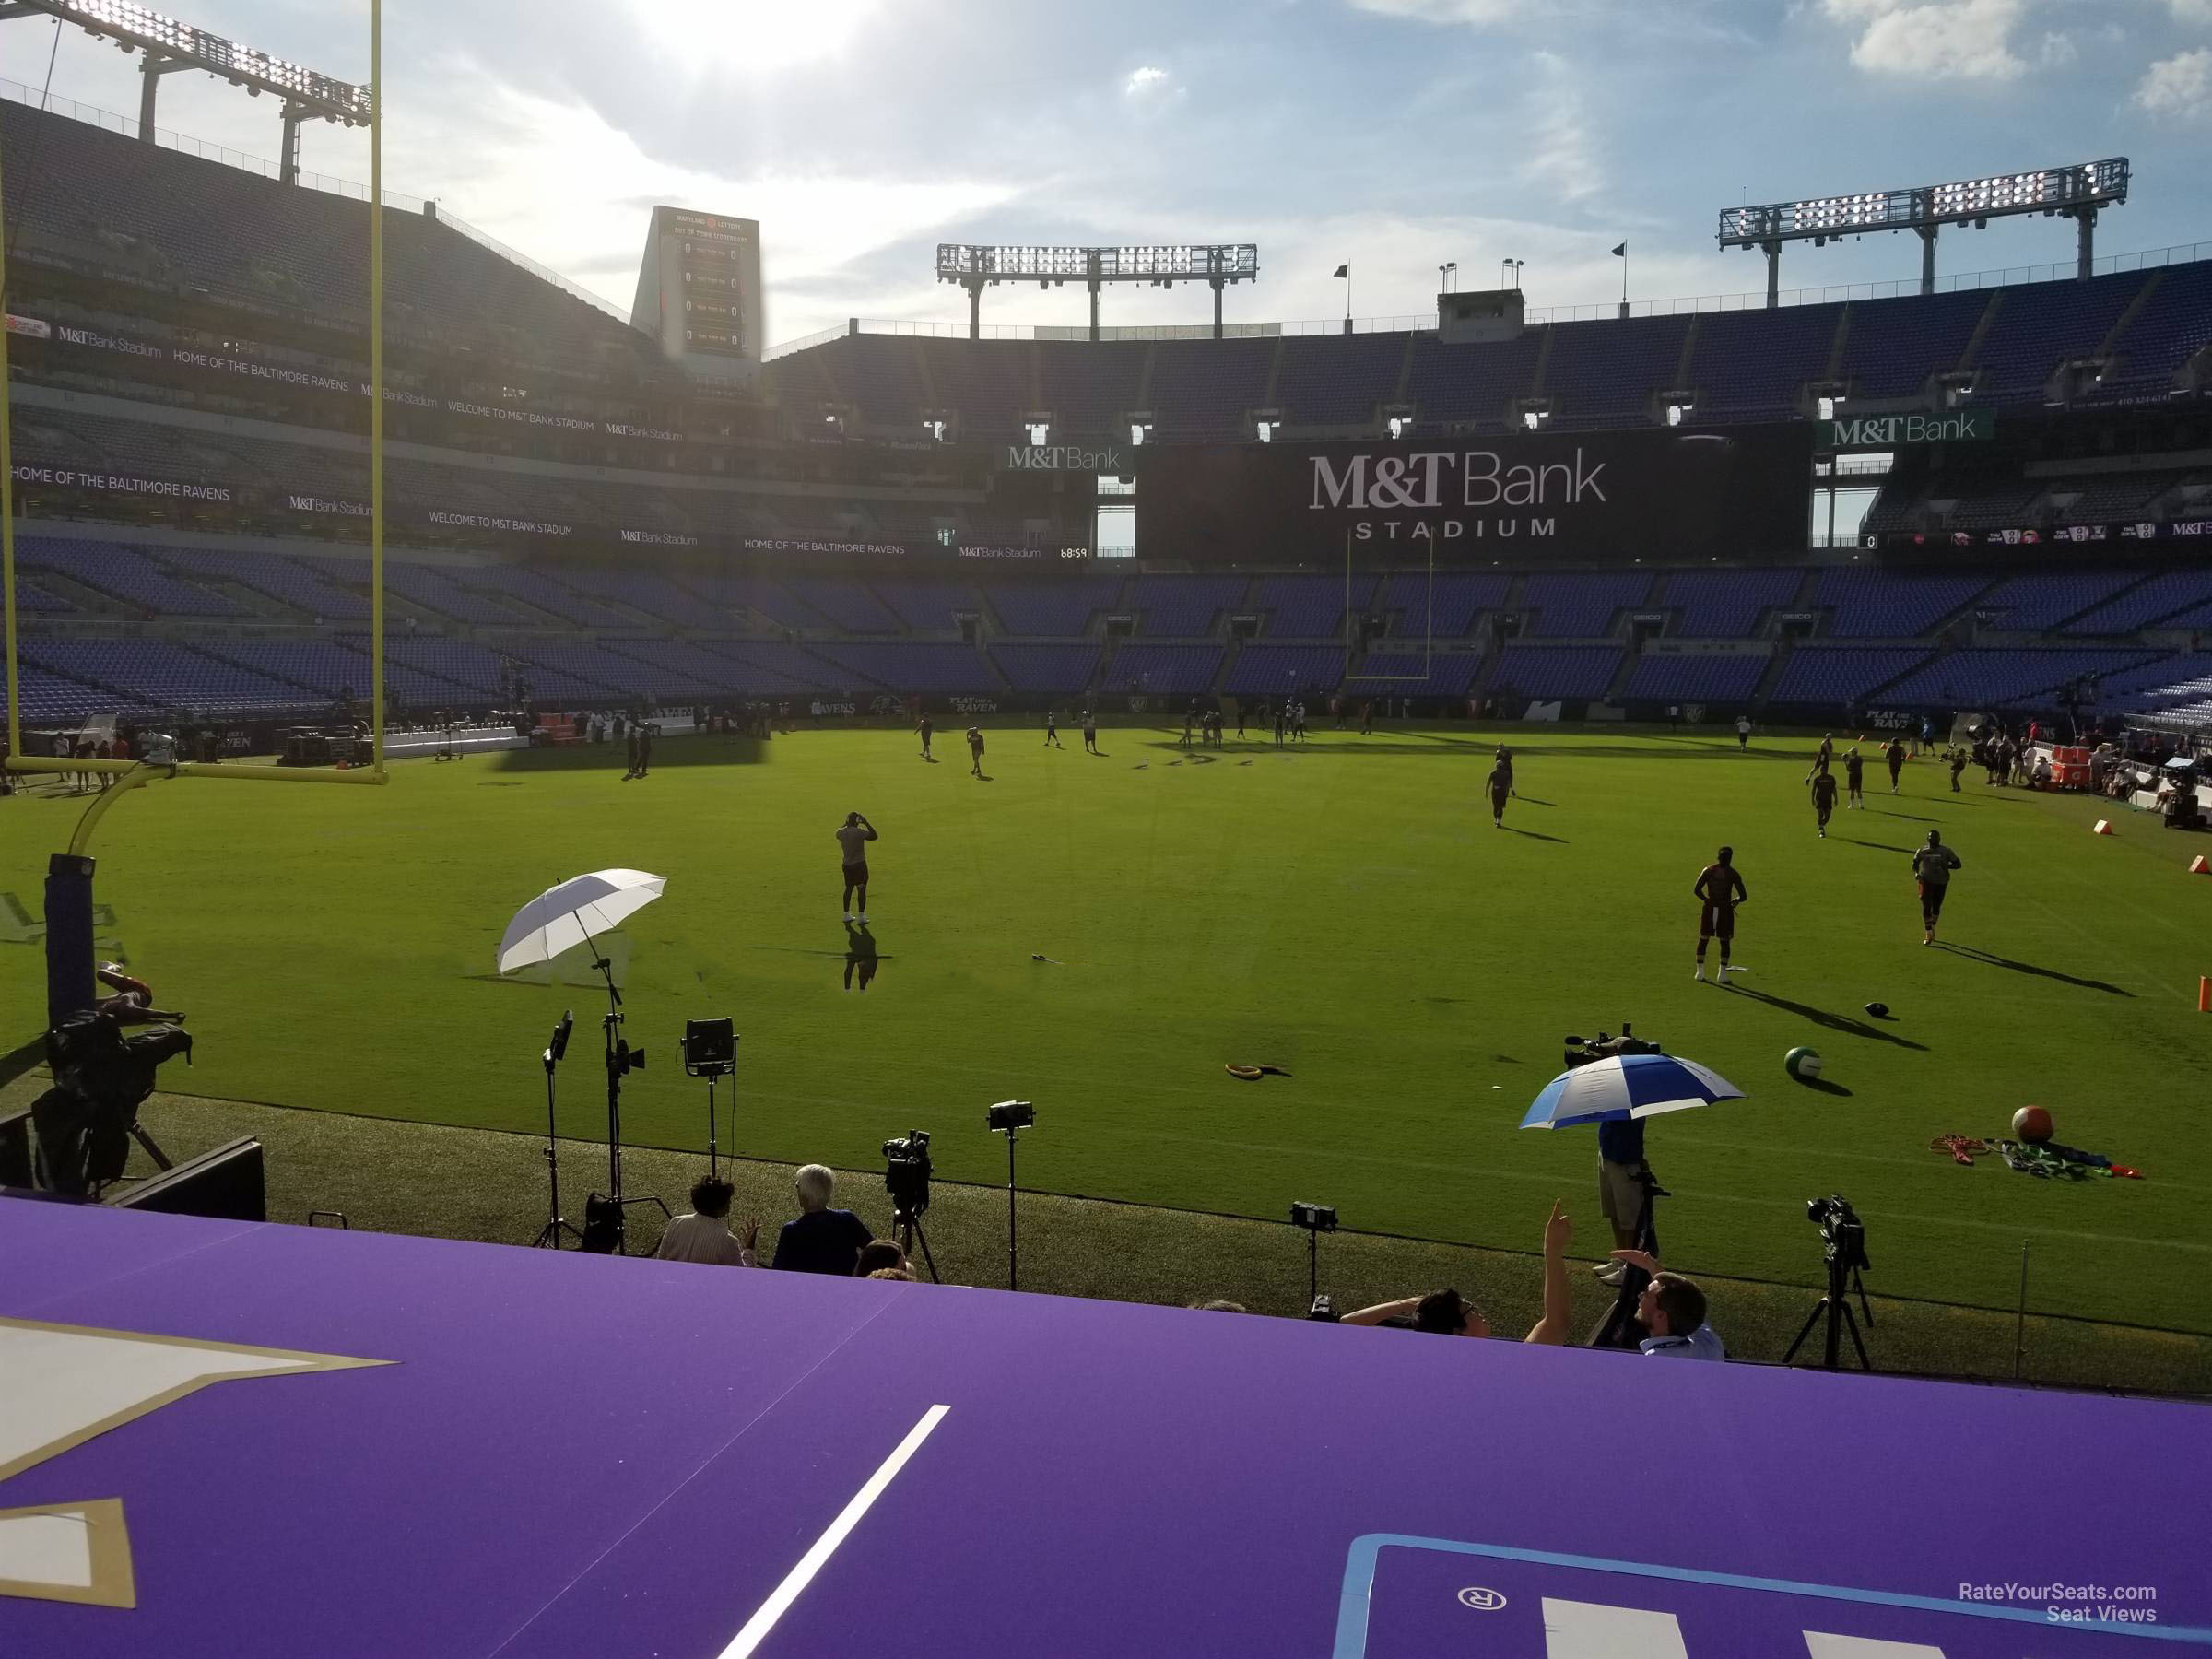 section 111, row 11 seat view  for football - m&t bank stadium